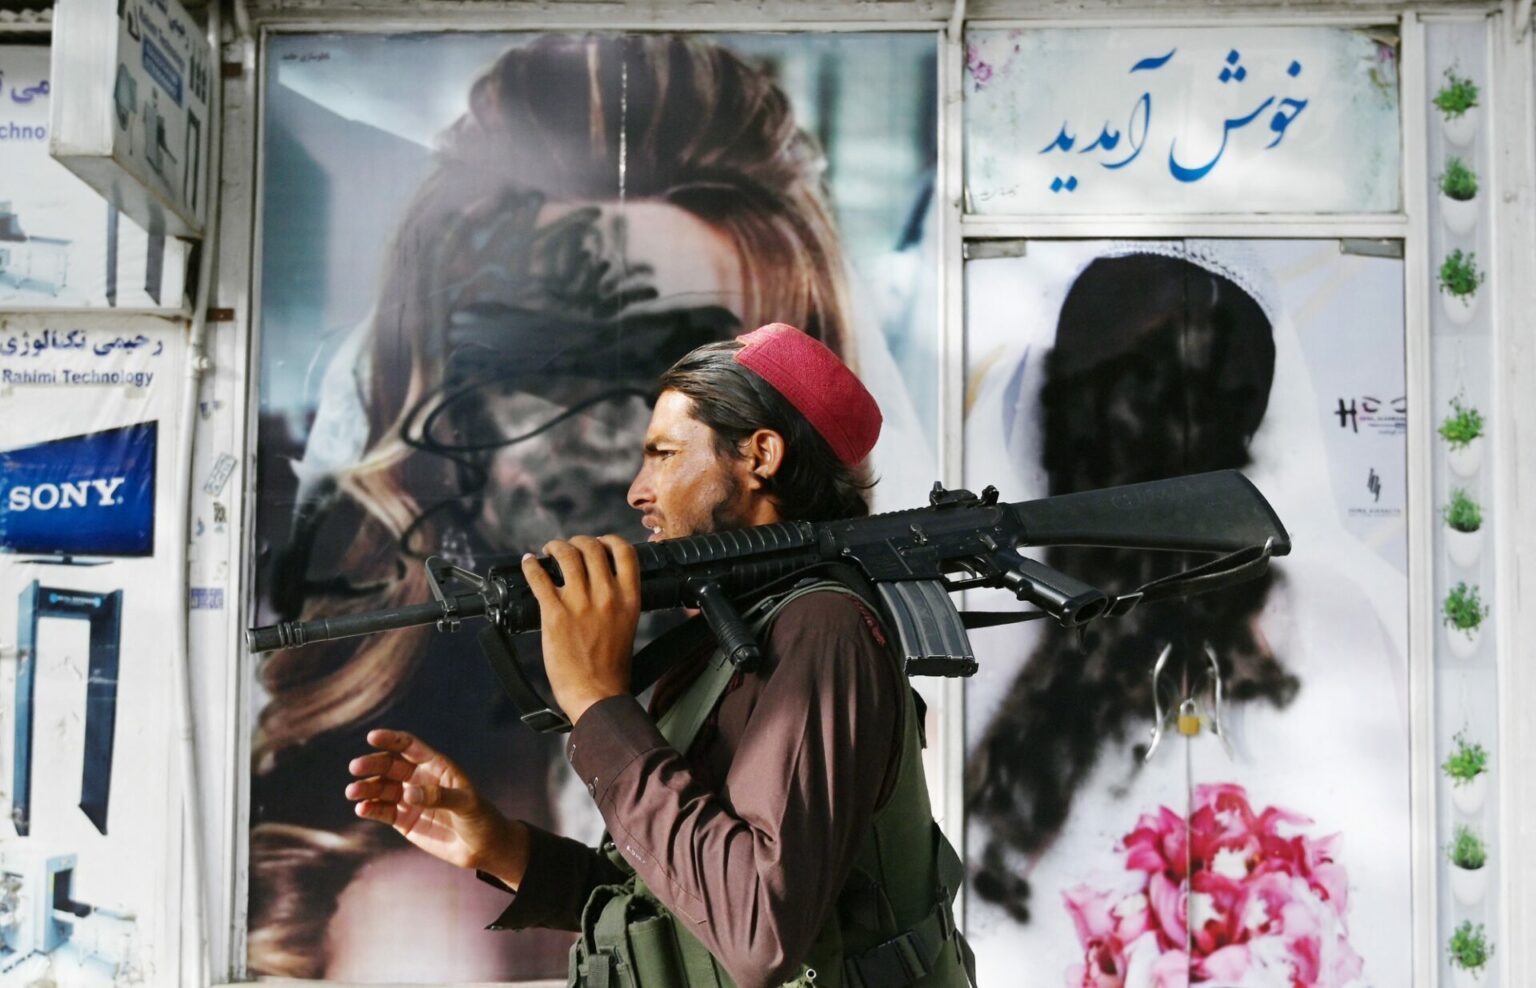 AFGHANISTAN’S MAKEOVER: TALIBAN BANS BEAUTY SALONS DESPITE PROTESTS - Asiana Times